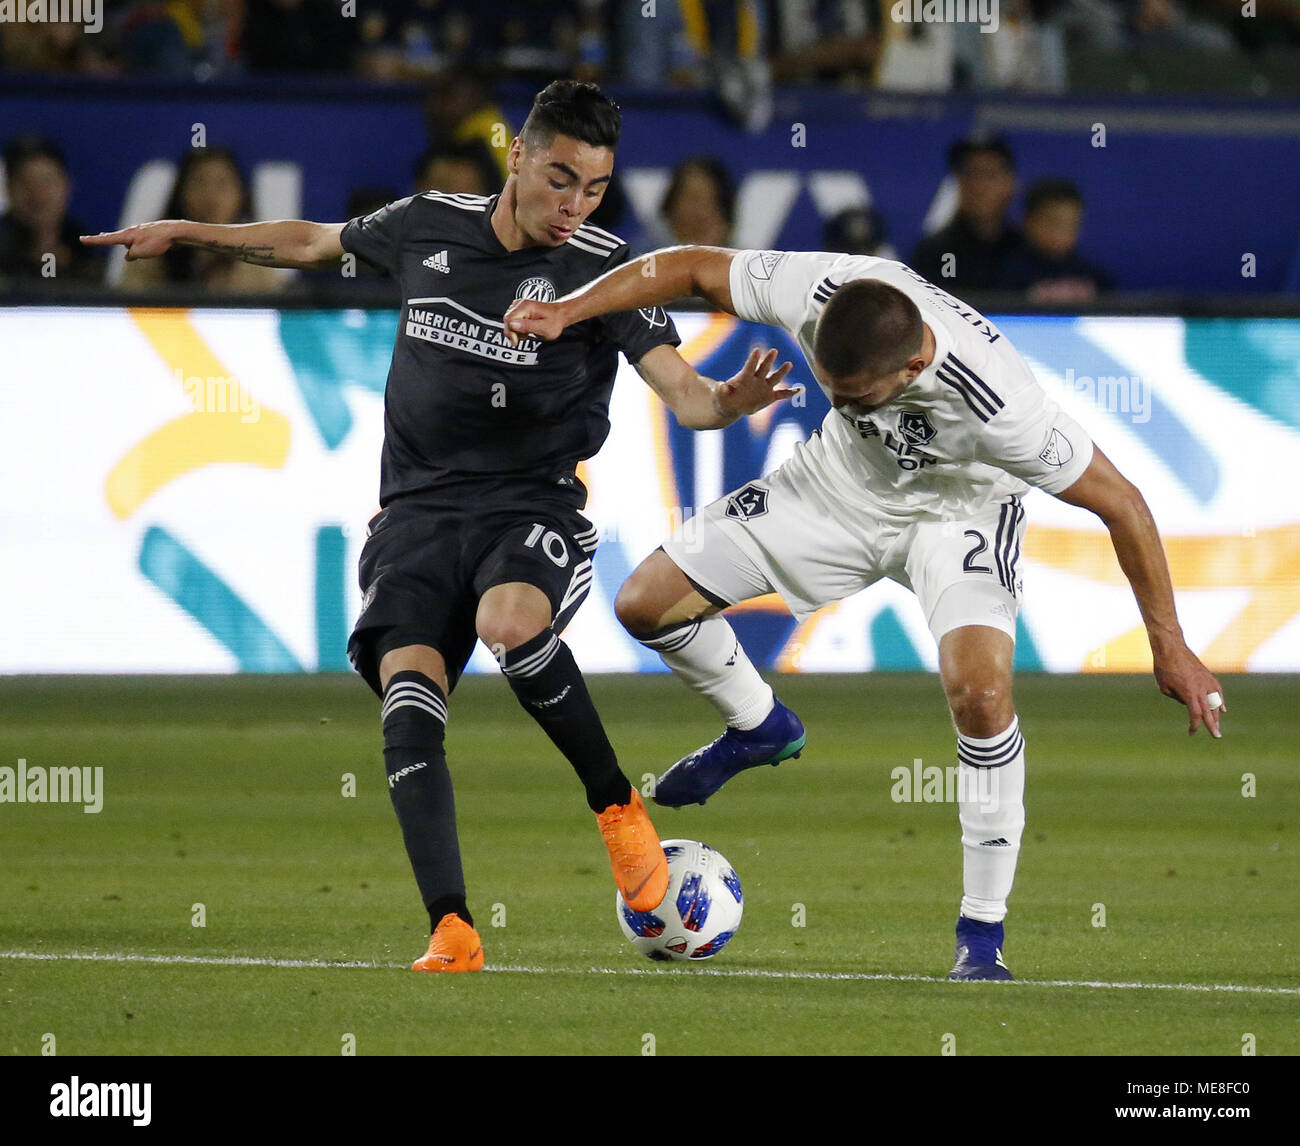 Los Angeles, California, USA. 21st Apr, 2018. Atlanta United's midfieder Miguel Almir''”n (10) vies with Los Angeles Galaxy's midfielder Perry Kitchen (2) during the 2018 Major League Soccer (MLS) match between Los Angeles Galaxy and Atlanta United in Carson, California, April 21, 2018. Atlanta United won 2-0. Credit: Ringo Chiu/ZUMA Wire/Alamy Live News Stock Photo